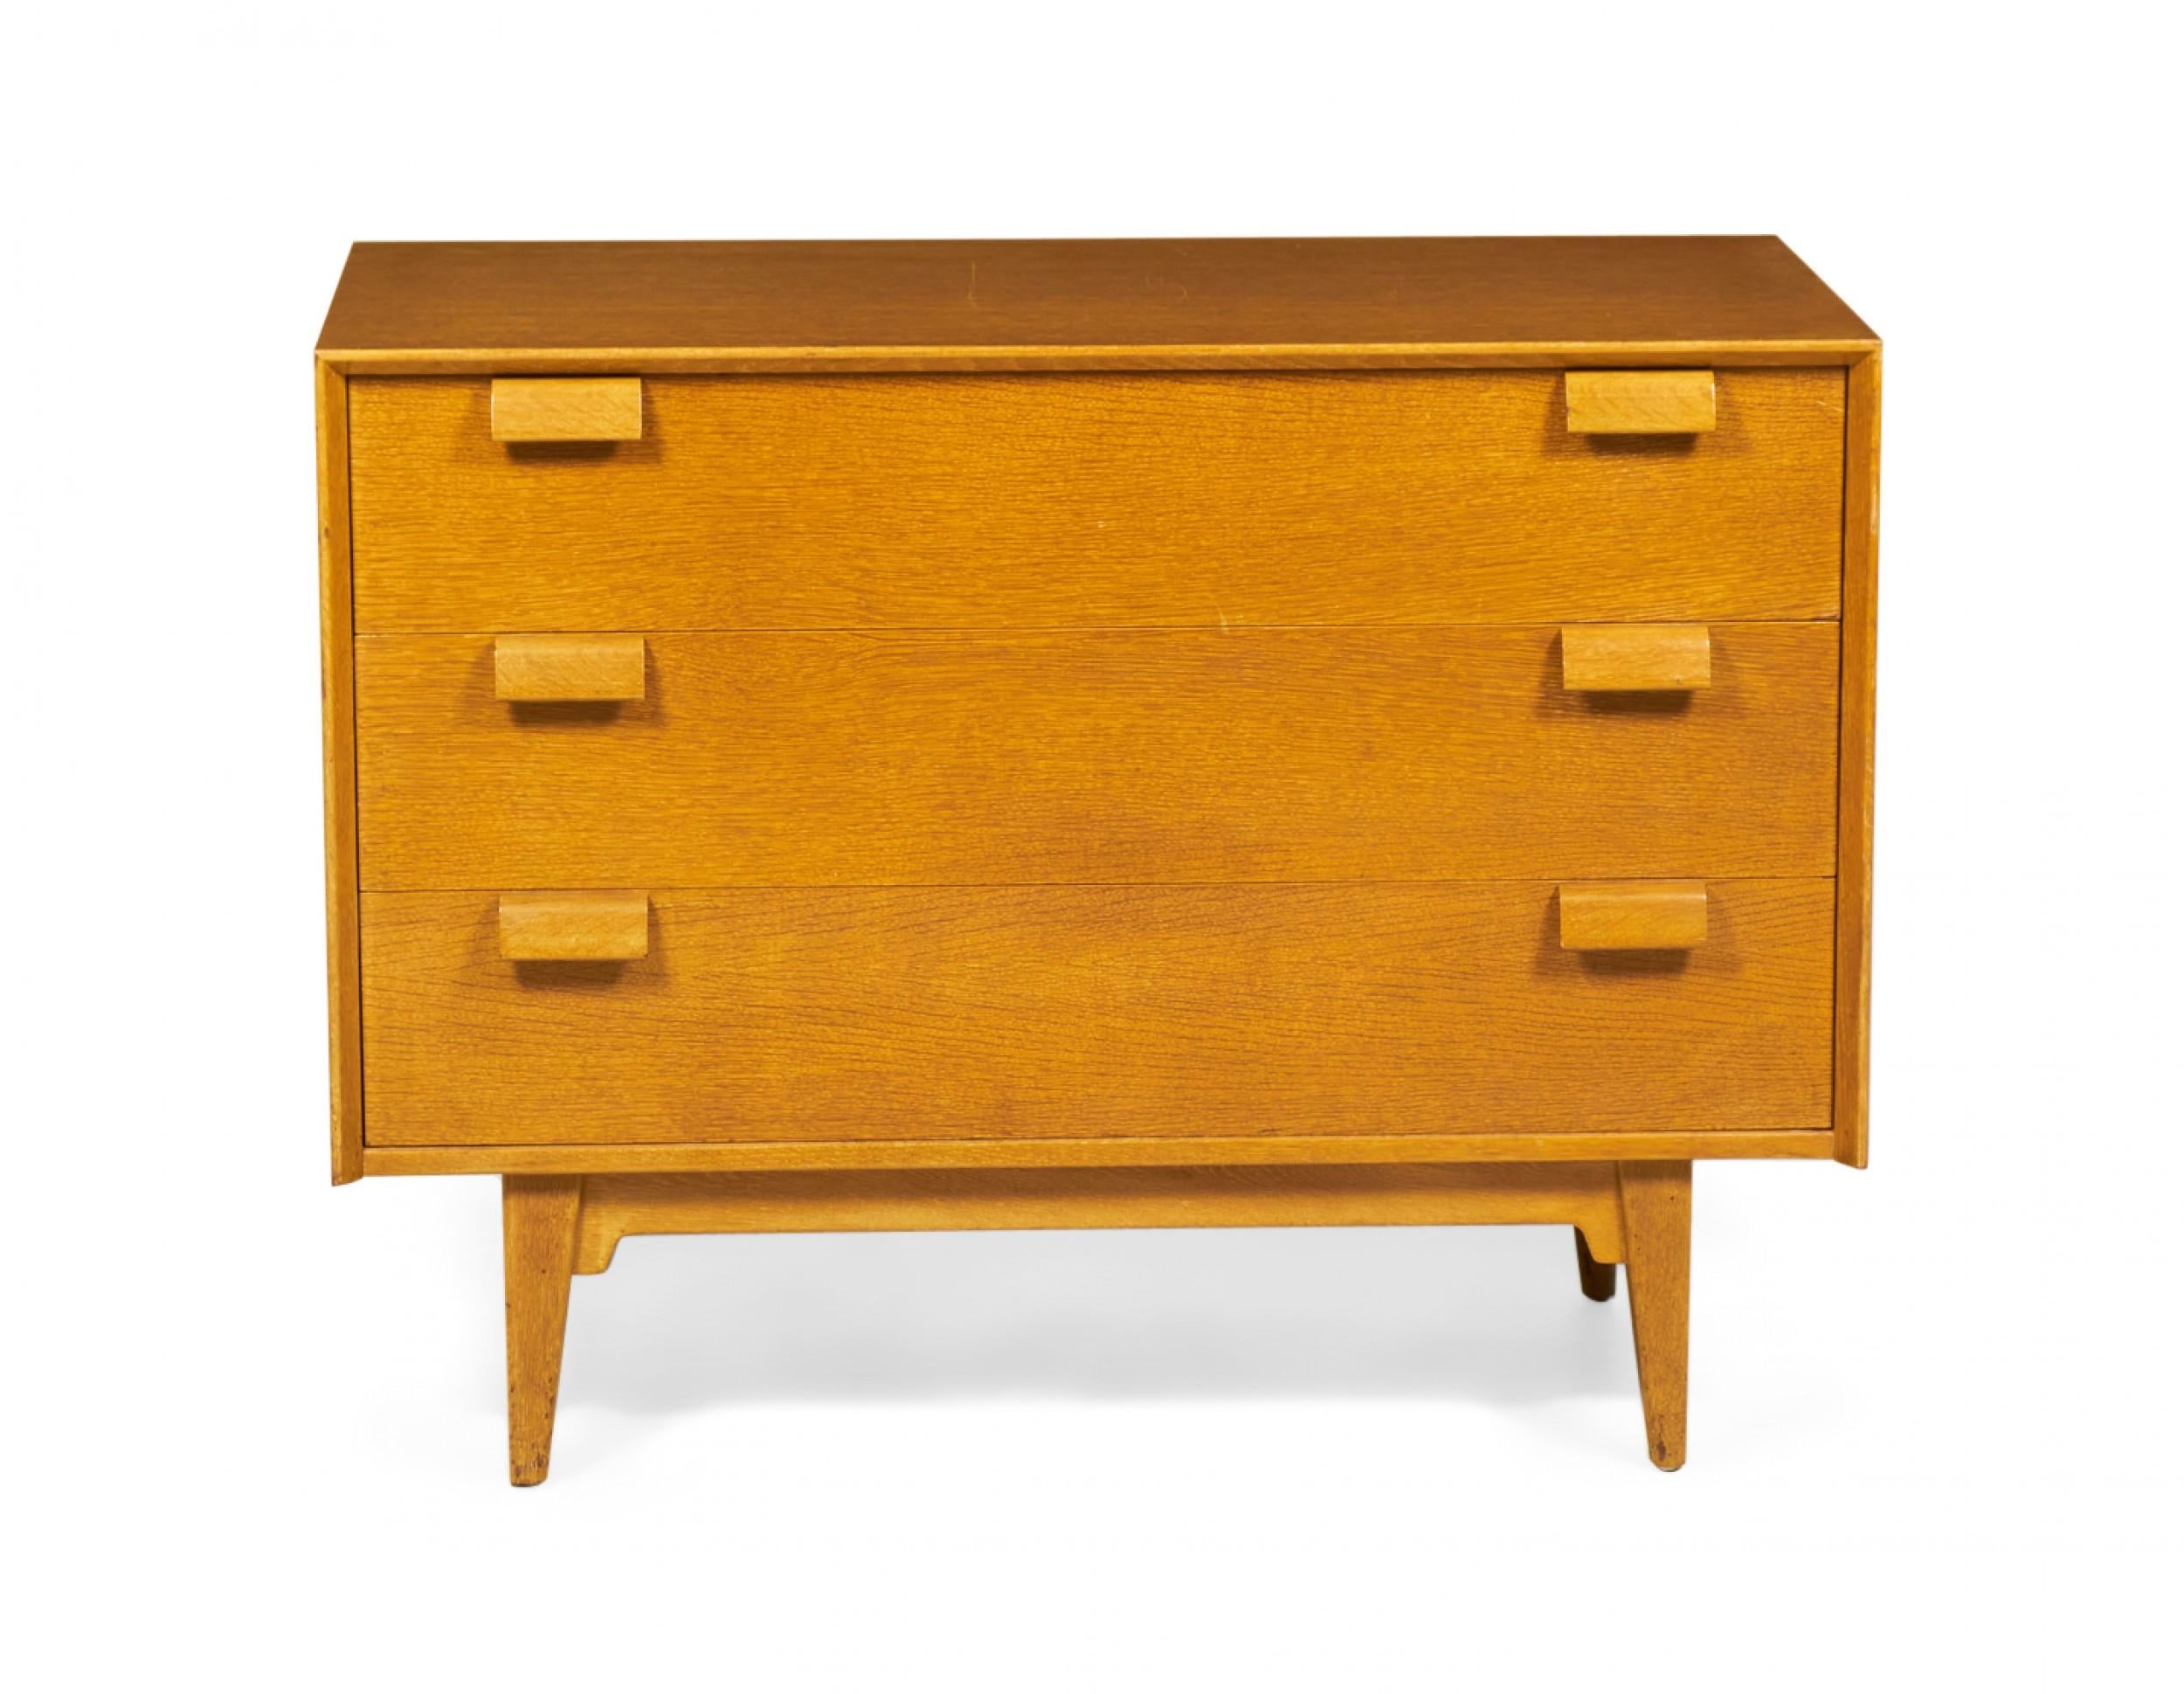 PAIR of Danish Mid-Century chests / dressers with three drawers with angled wooden drawer pulls in a blond oak case resting on tapered wooden legs. (JENS RISOM)(PRICED AS PAIR)
